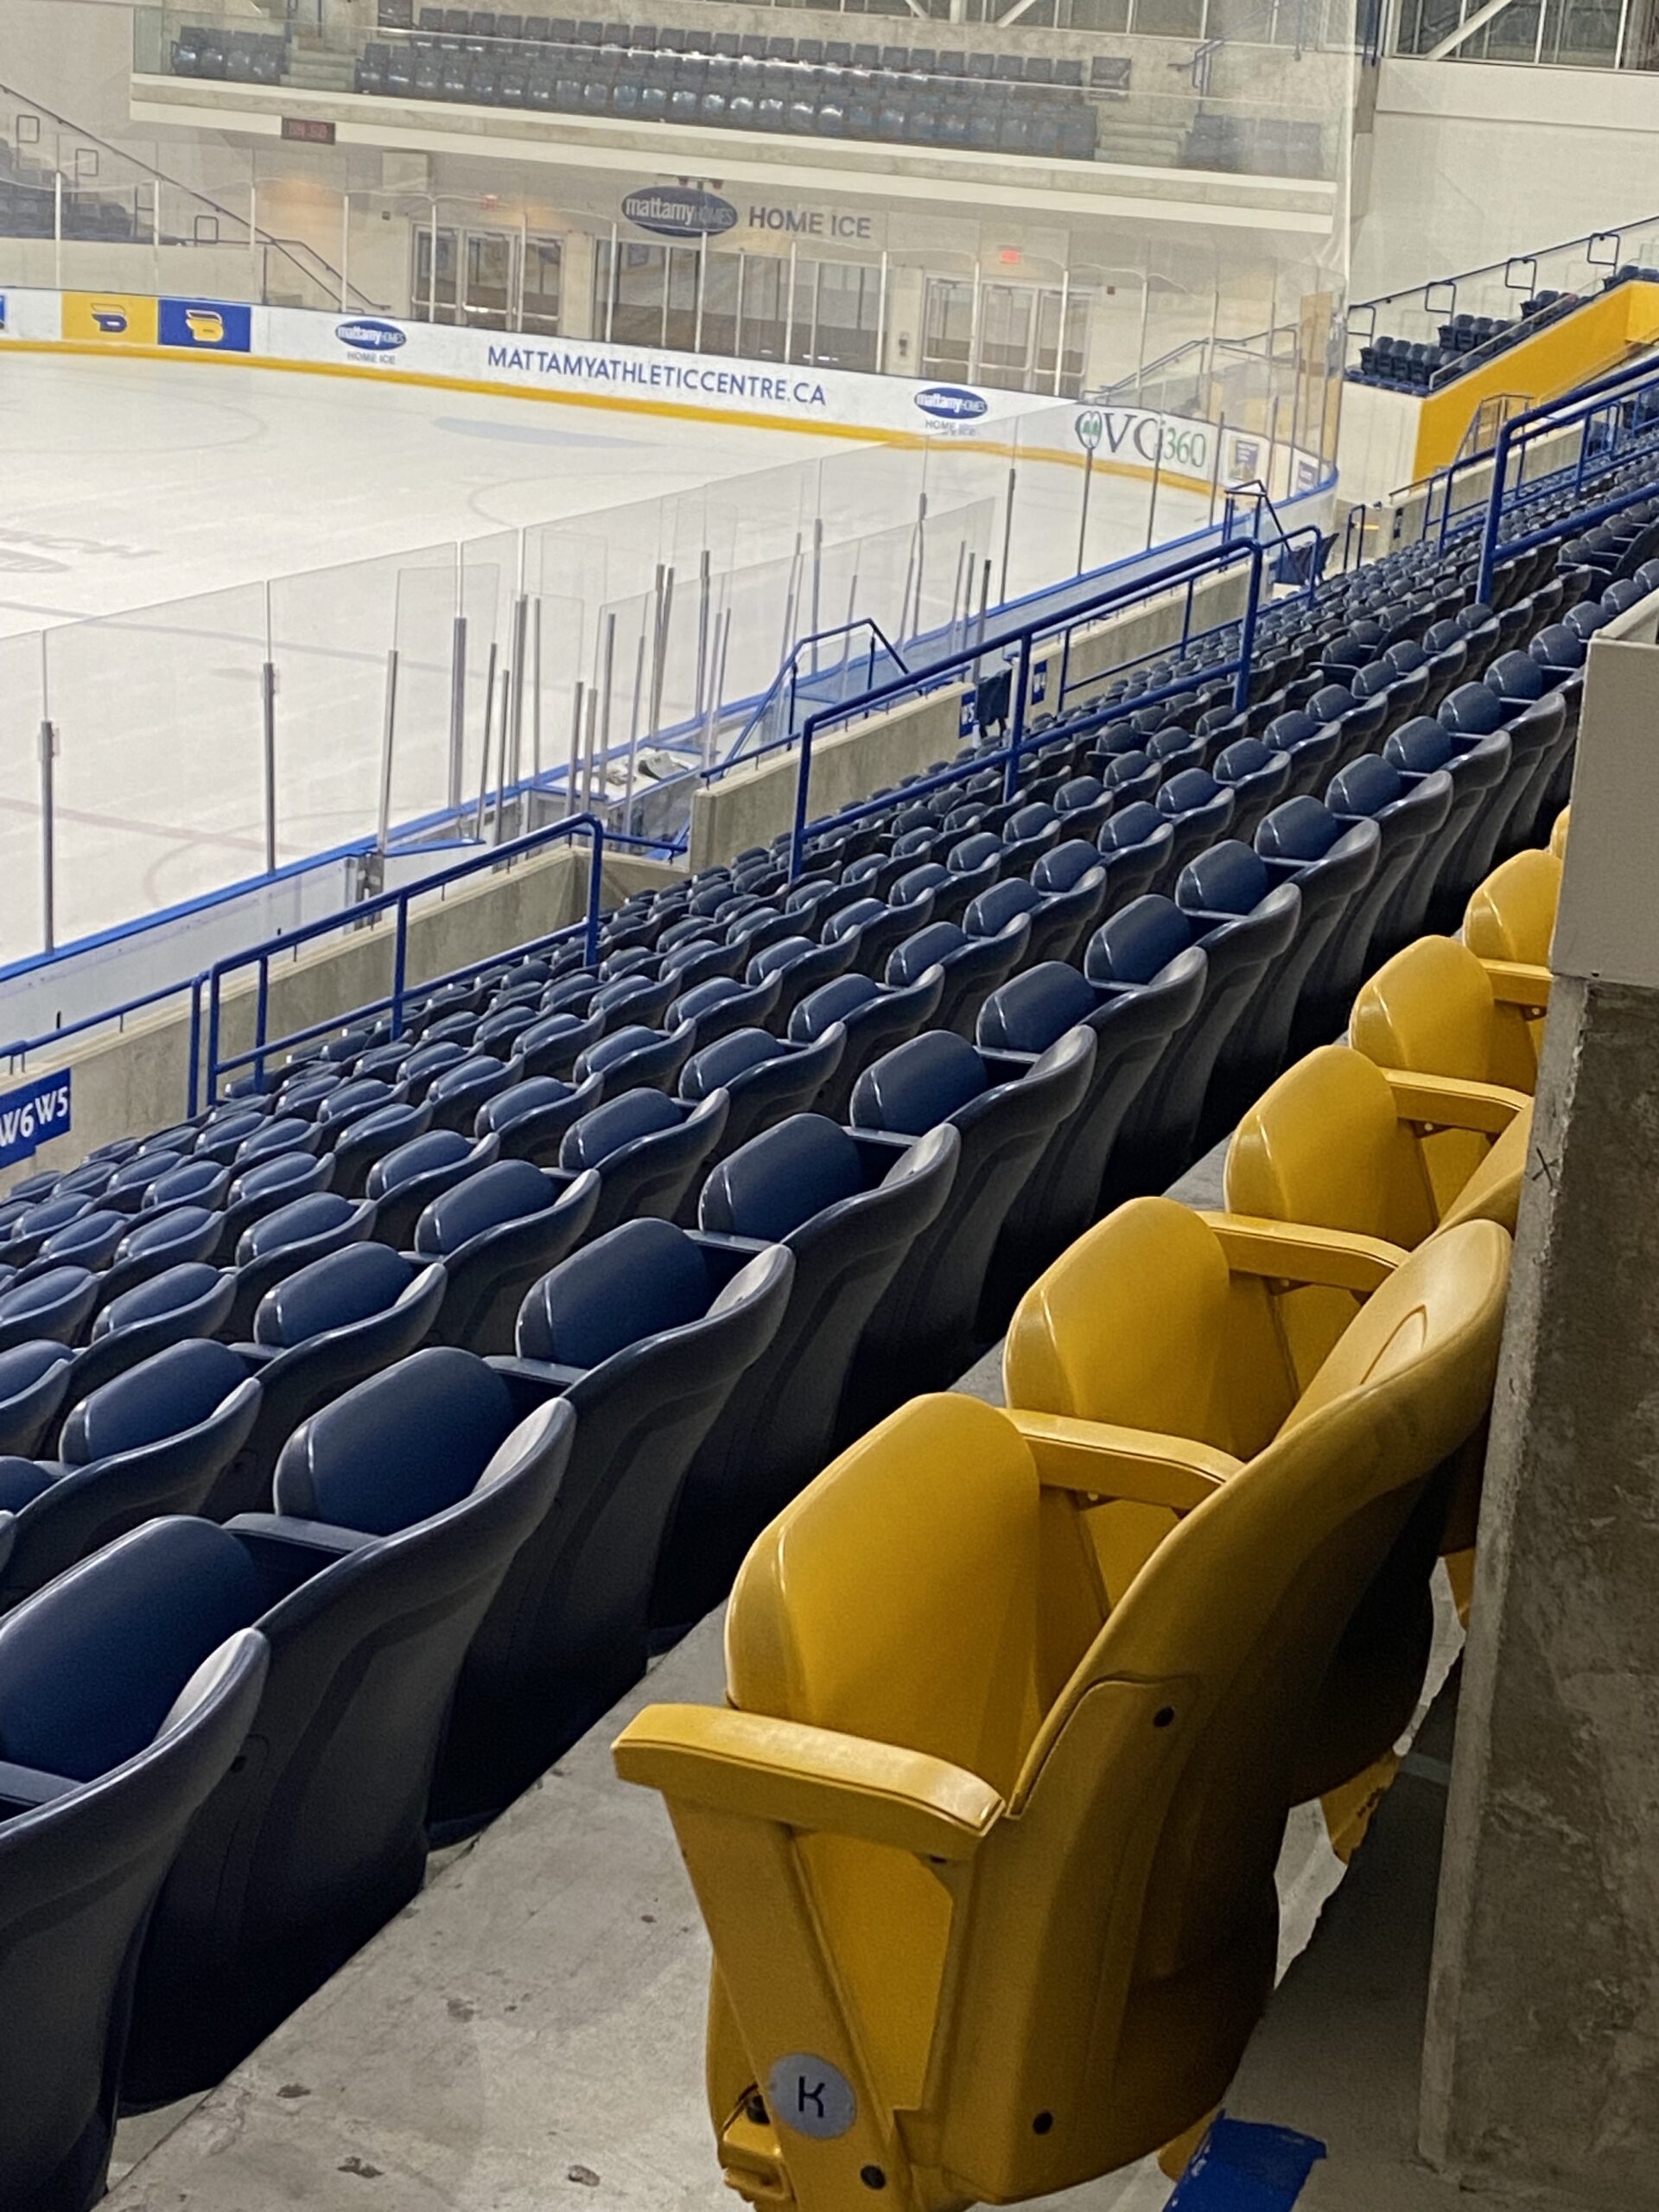 A section of empty blue and yellow seats 